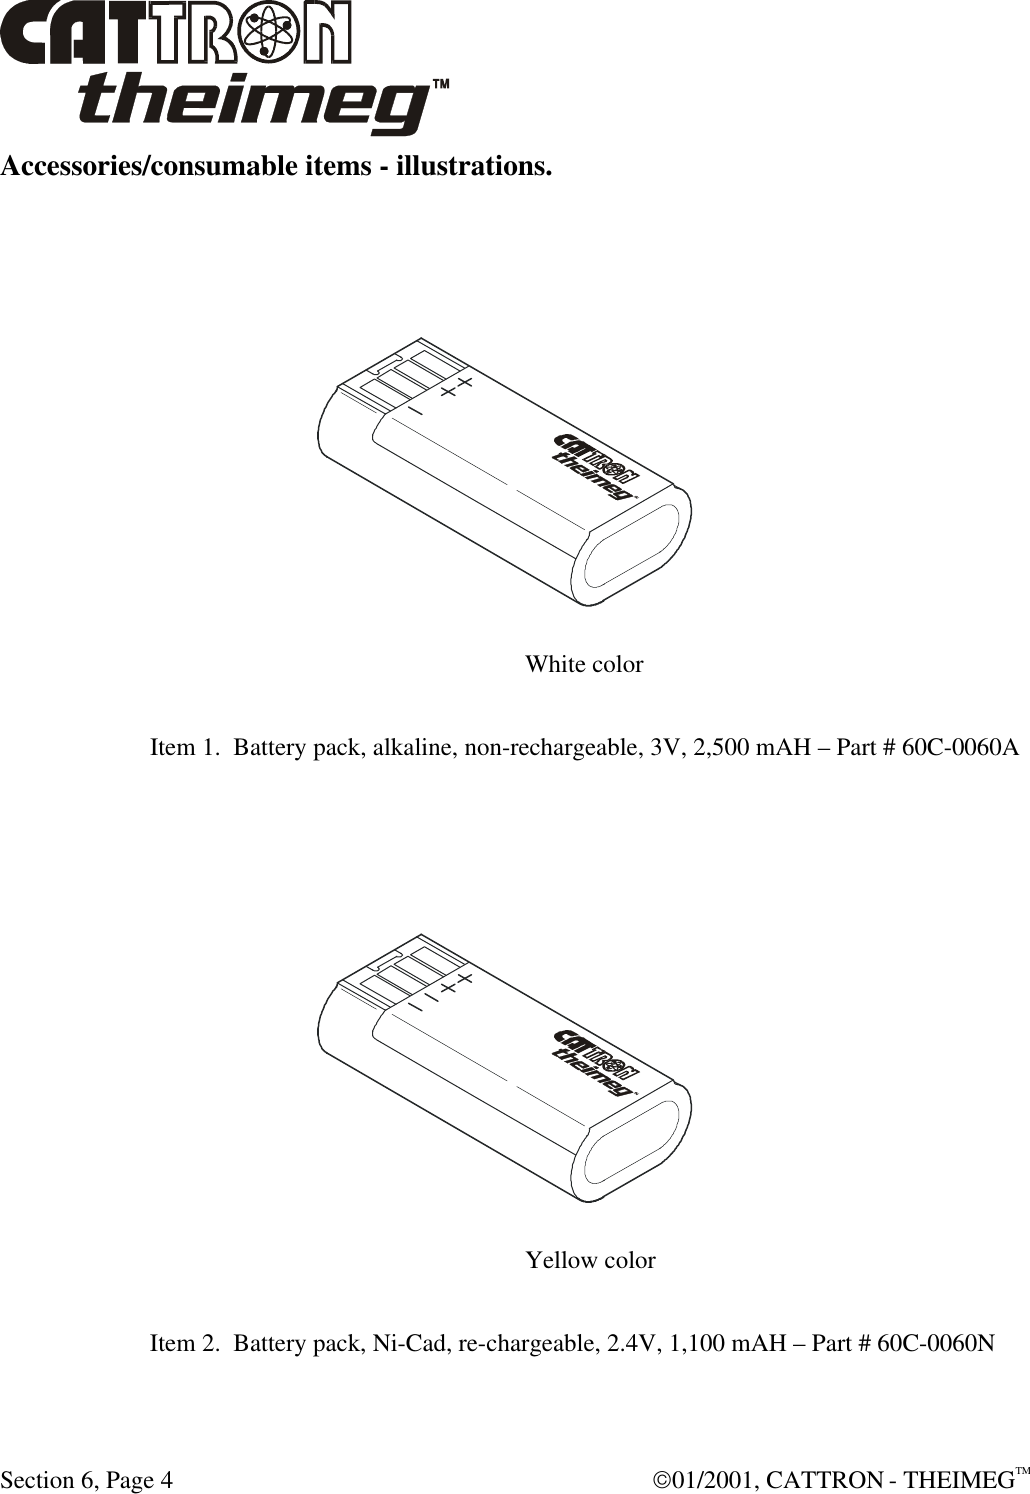  Section 6, Page 4  01/2001, CATTRON - THEIMEGTM Accessories/consumable items - illustrations.          White color  Item 1.  Battery pack, alkaline, non-rechargeable, 3V, 2,500 mAH – Part # 60C-0060A     Yellow color  Item 2.  Battery pack, Ni-Cad, re-chargeable, 2.4V, 1,100 mAH – Part # 60C-0060N 